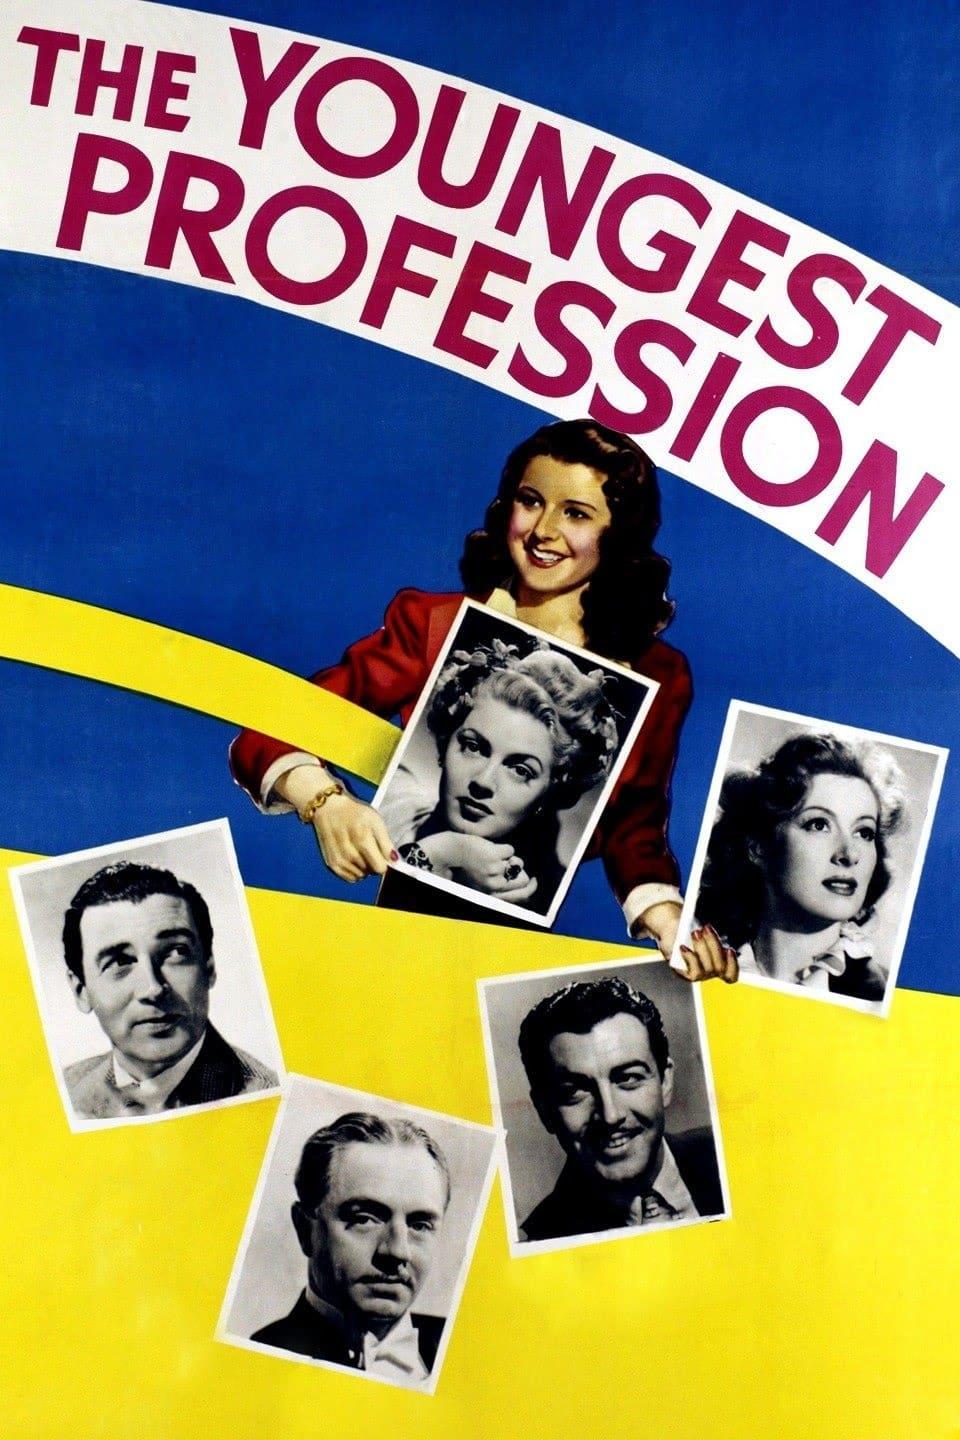 The Youngest Profession poster